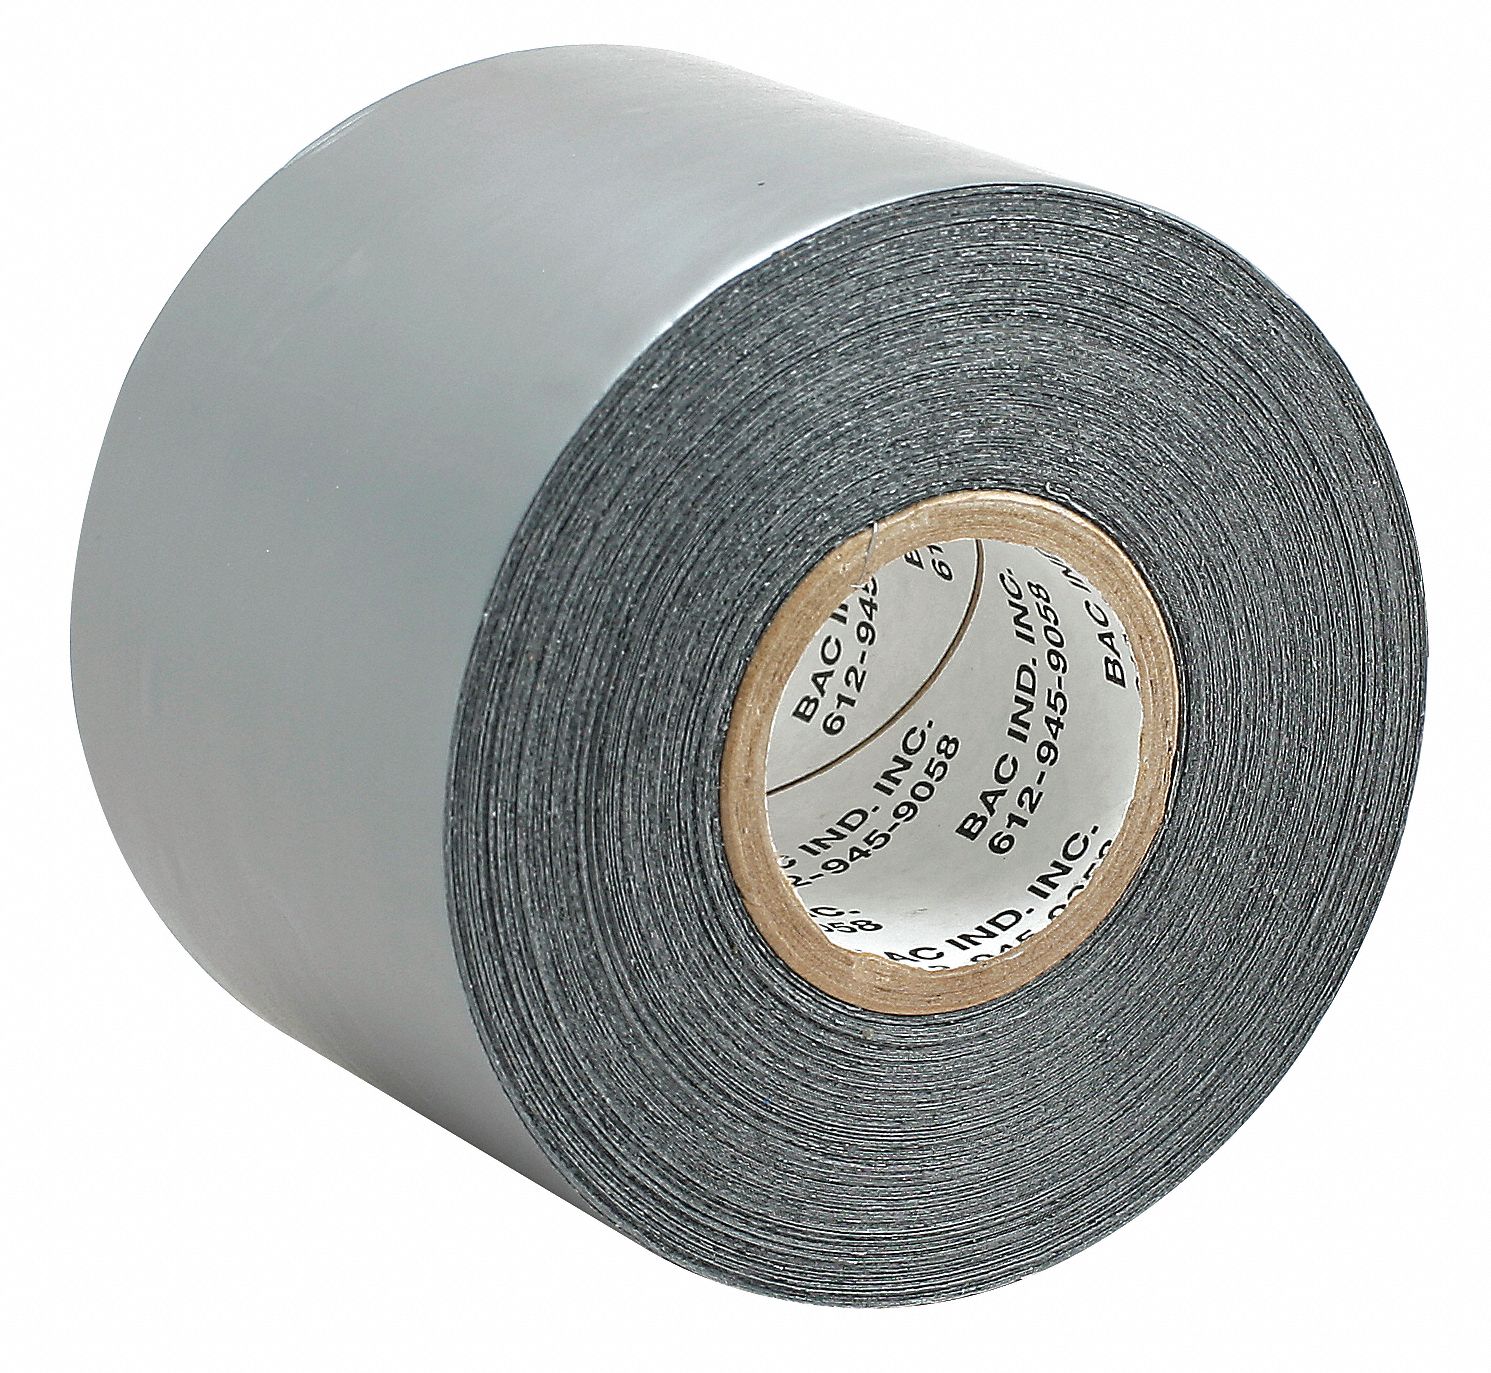 Duct Tape: BAC Industries Inc., Series TS, Light Duty, 3 in x 36 yd, Silver, Continuous Roll